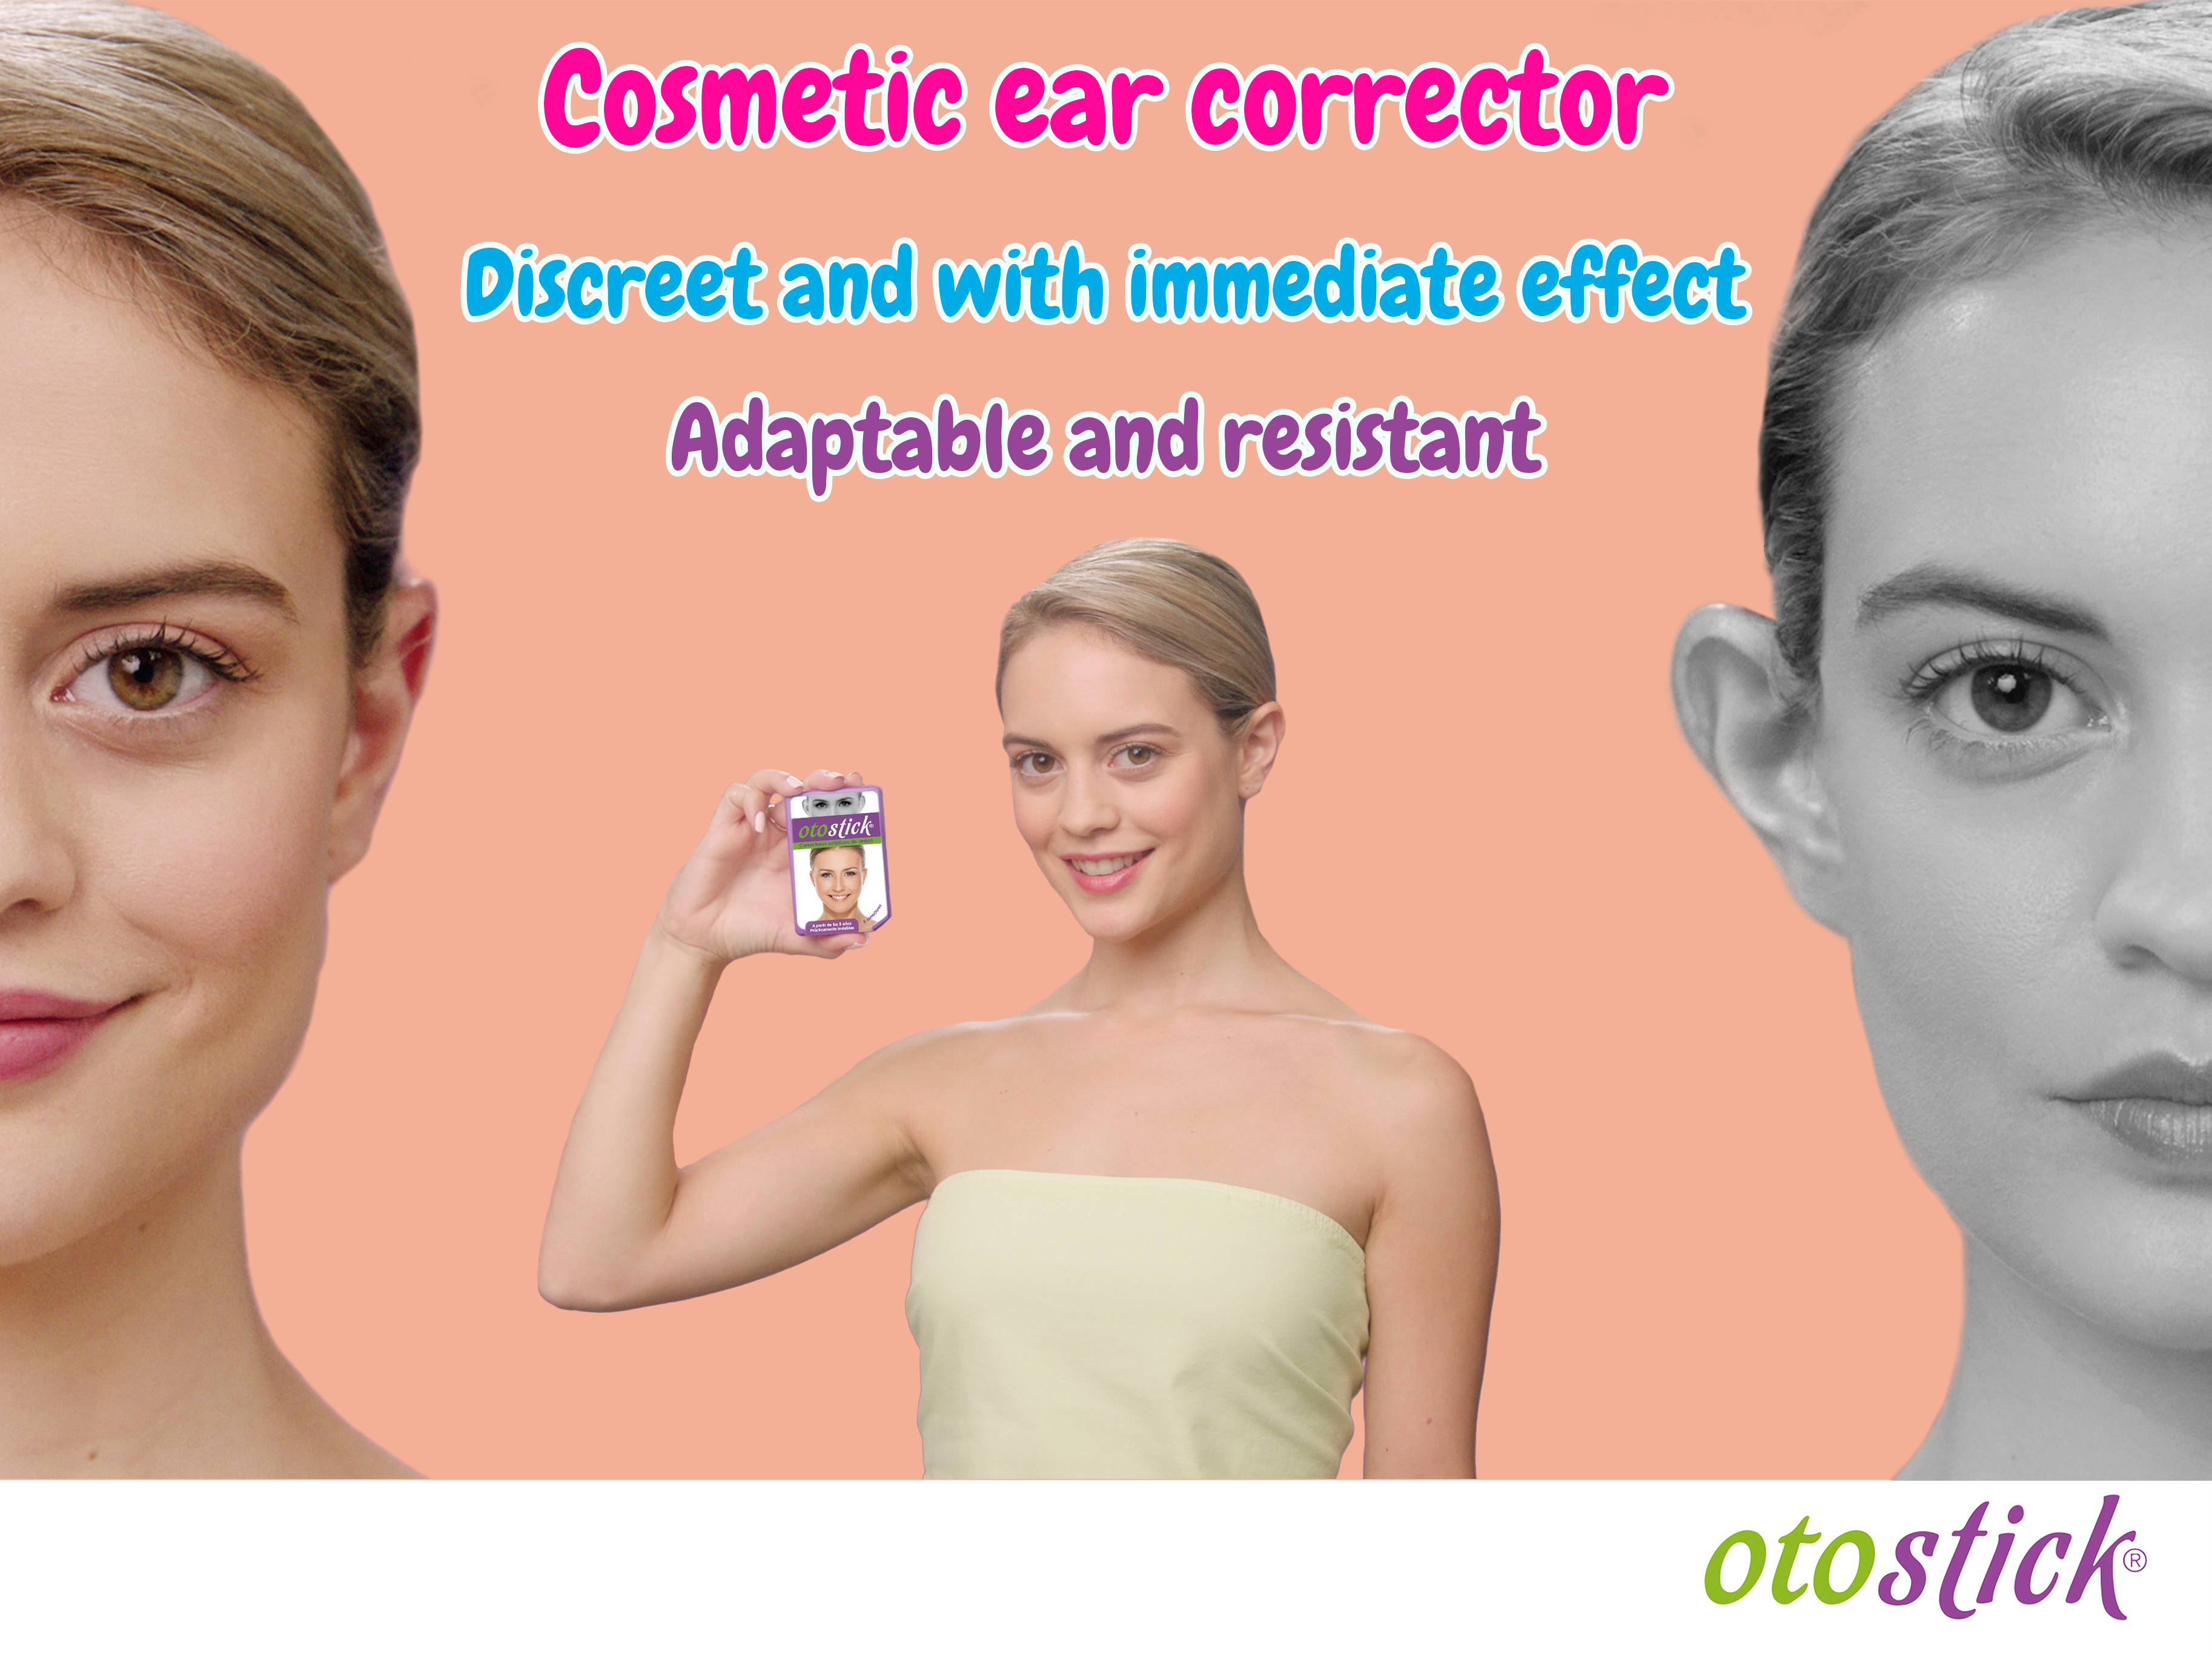 Otostick Ear Correctors - For Adults and Children 3 years+